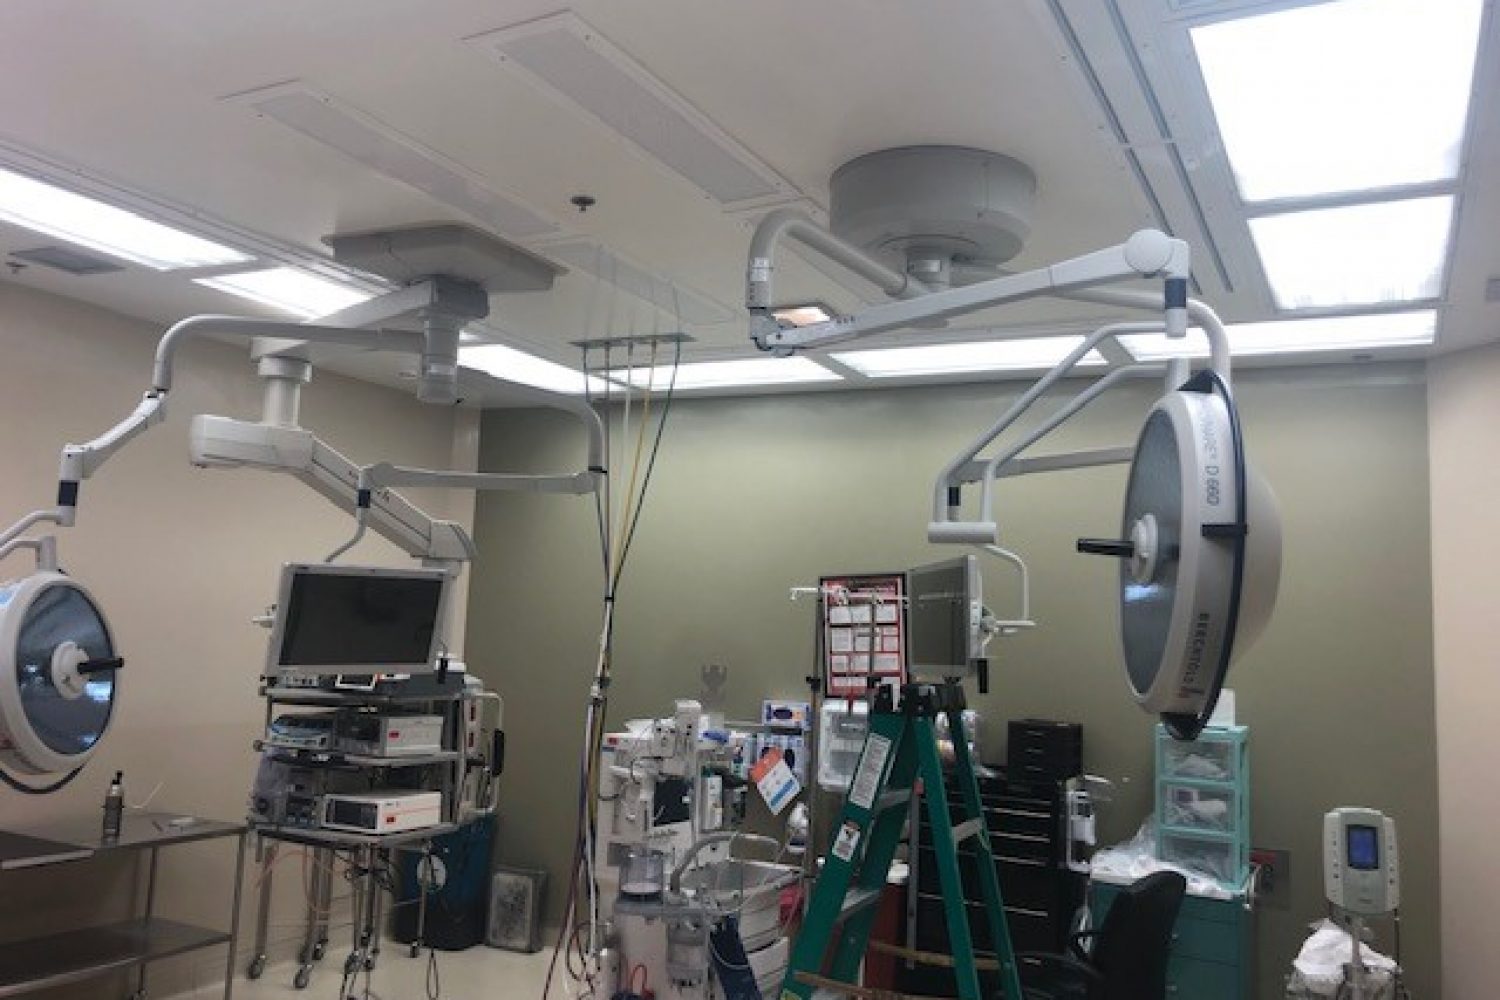 8 Room Flat Panel Upgrade at Montgomery Surgical Center